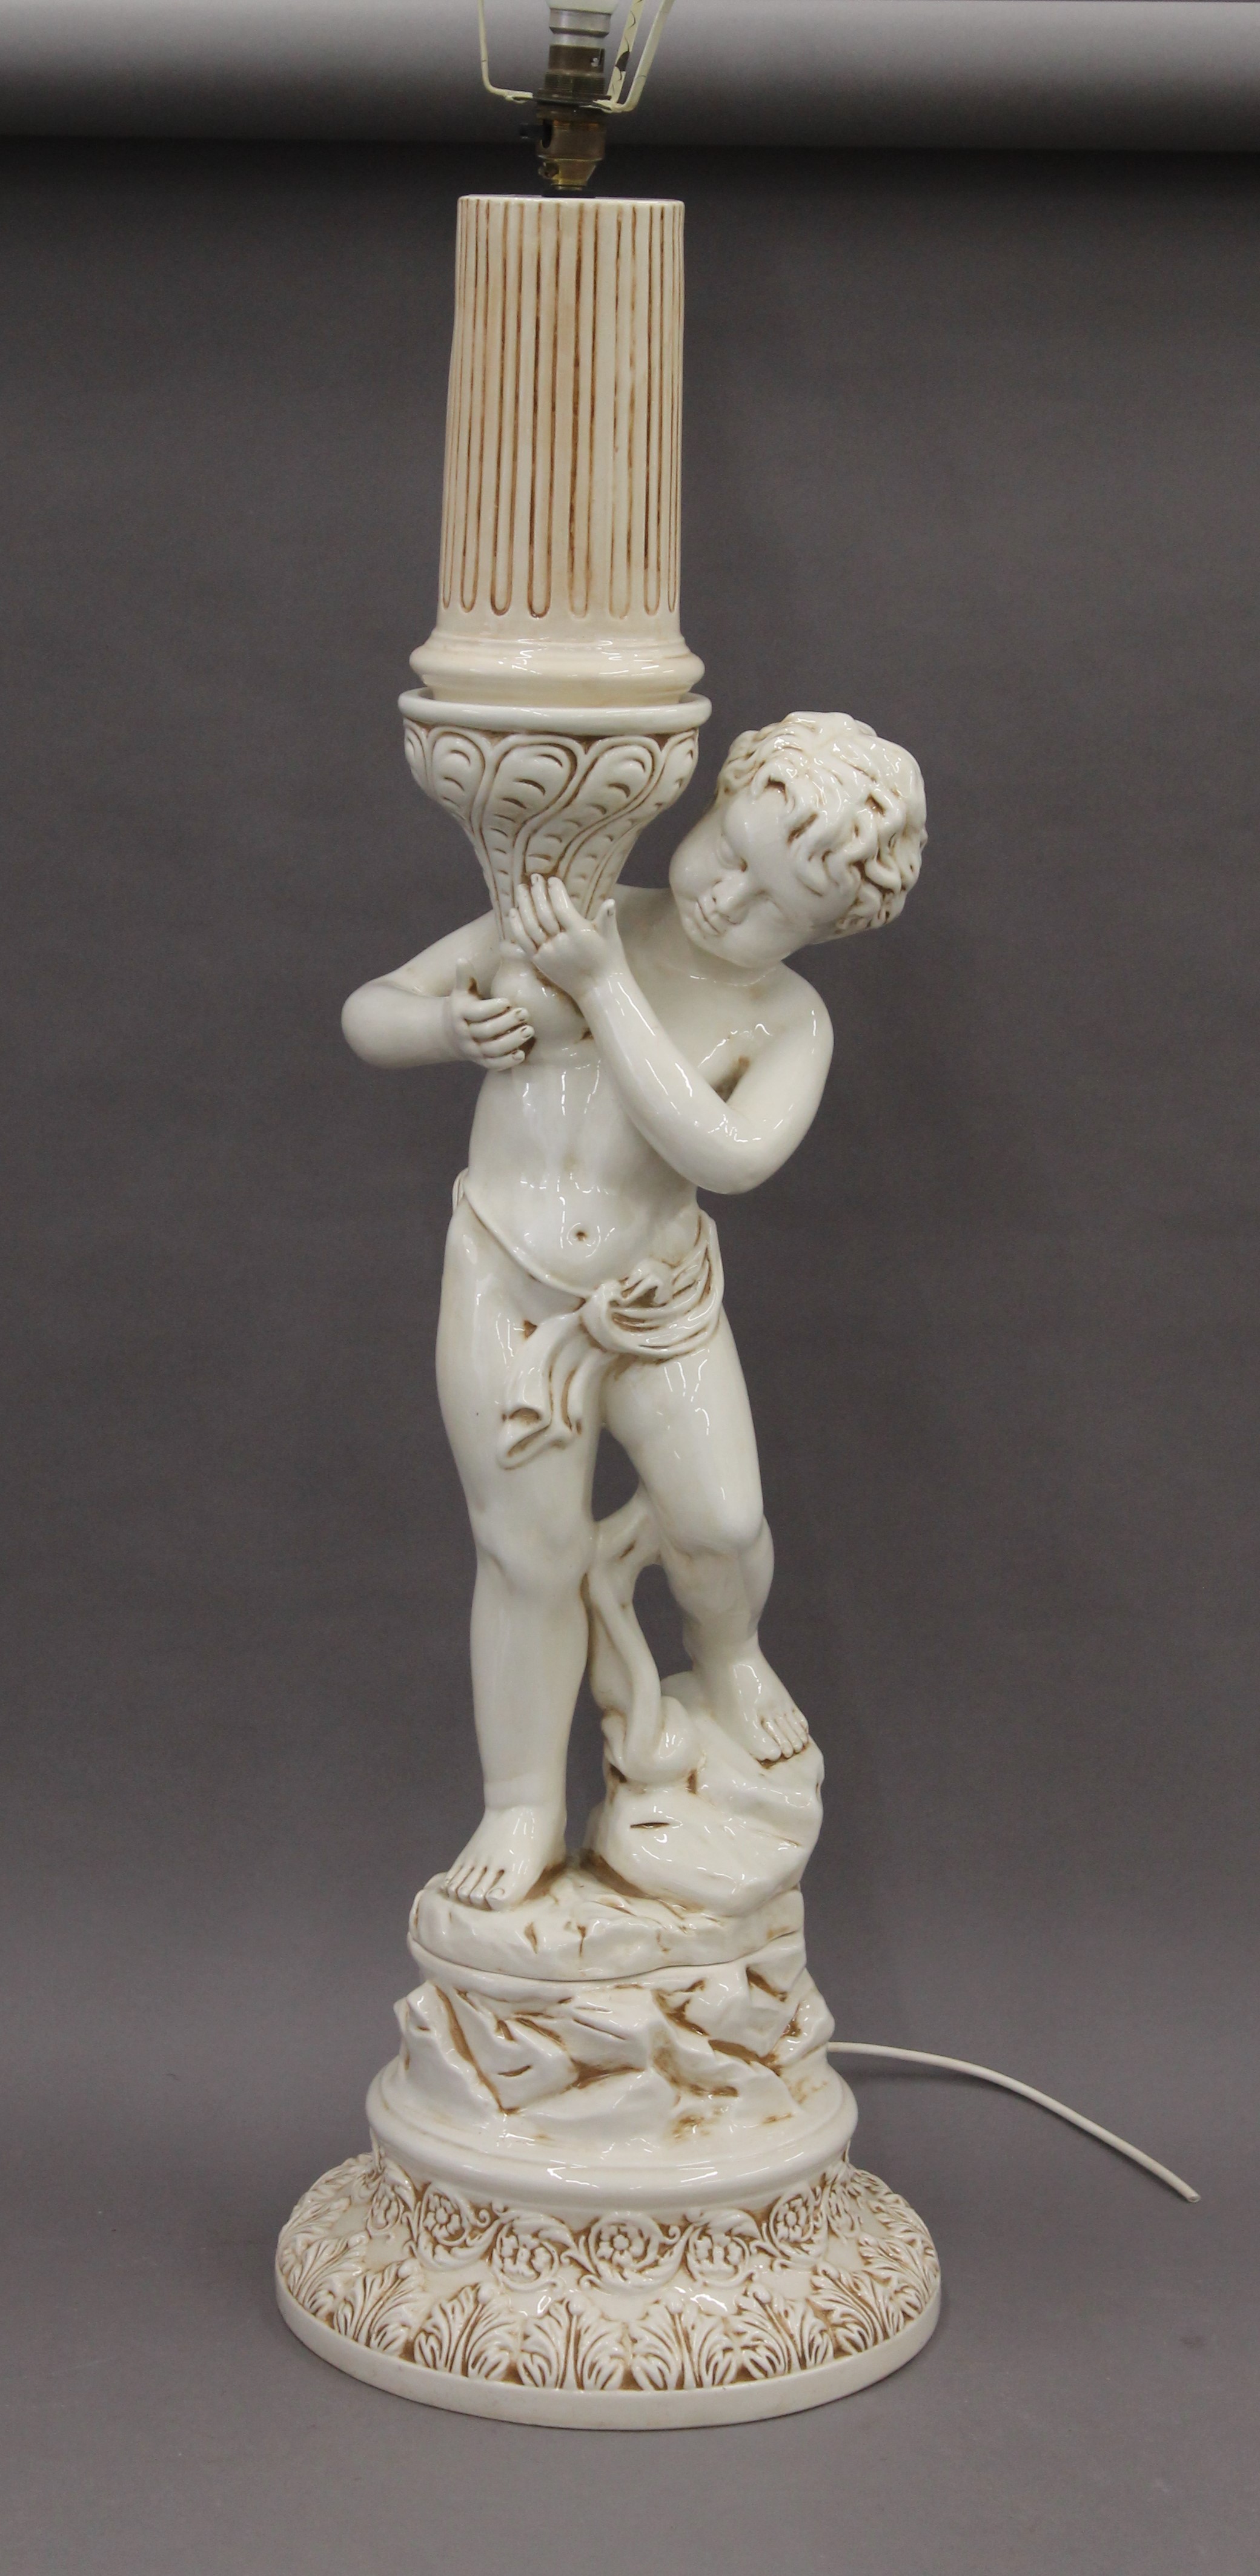 A porcelain figural lamp. 120 cm high overall.